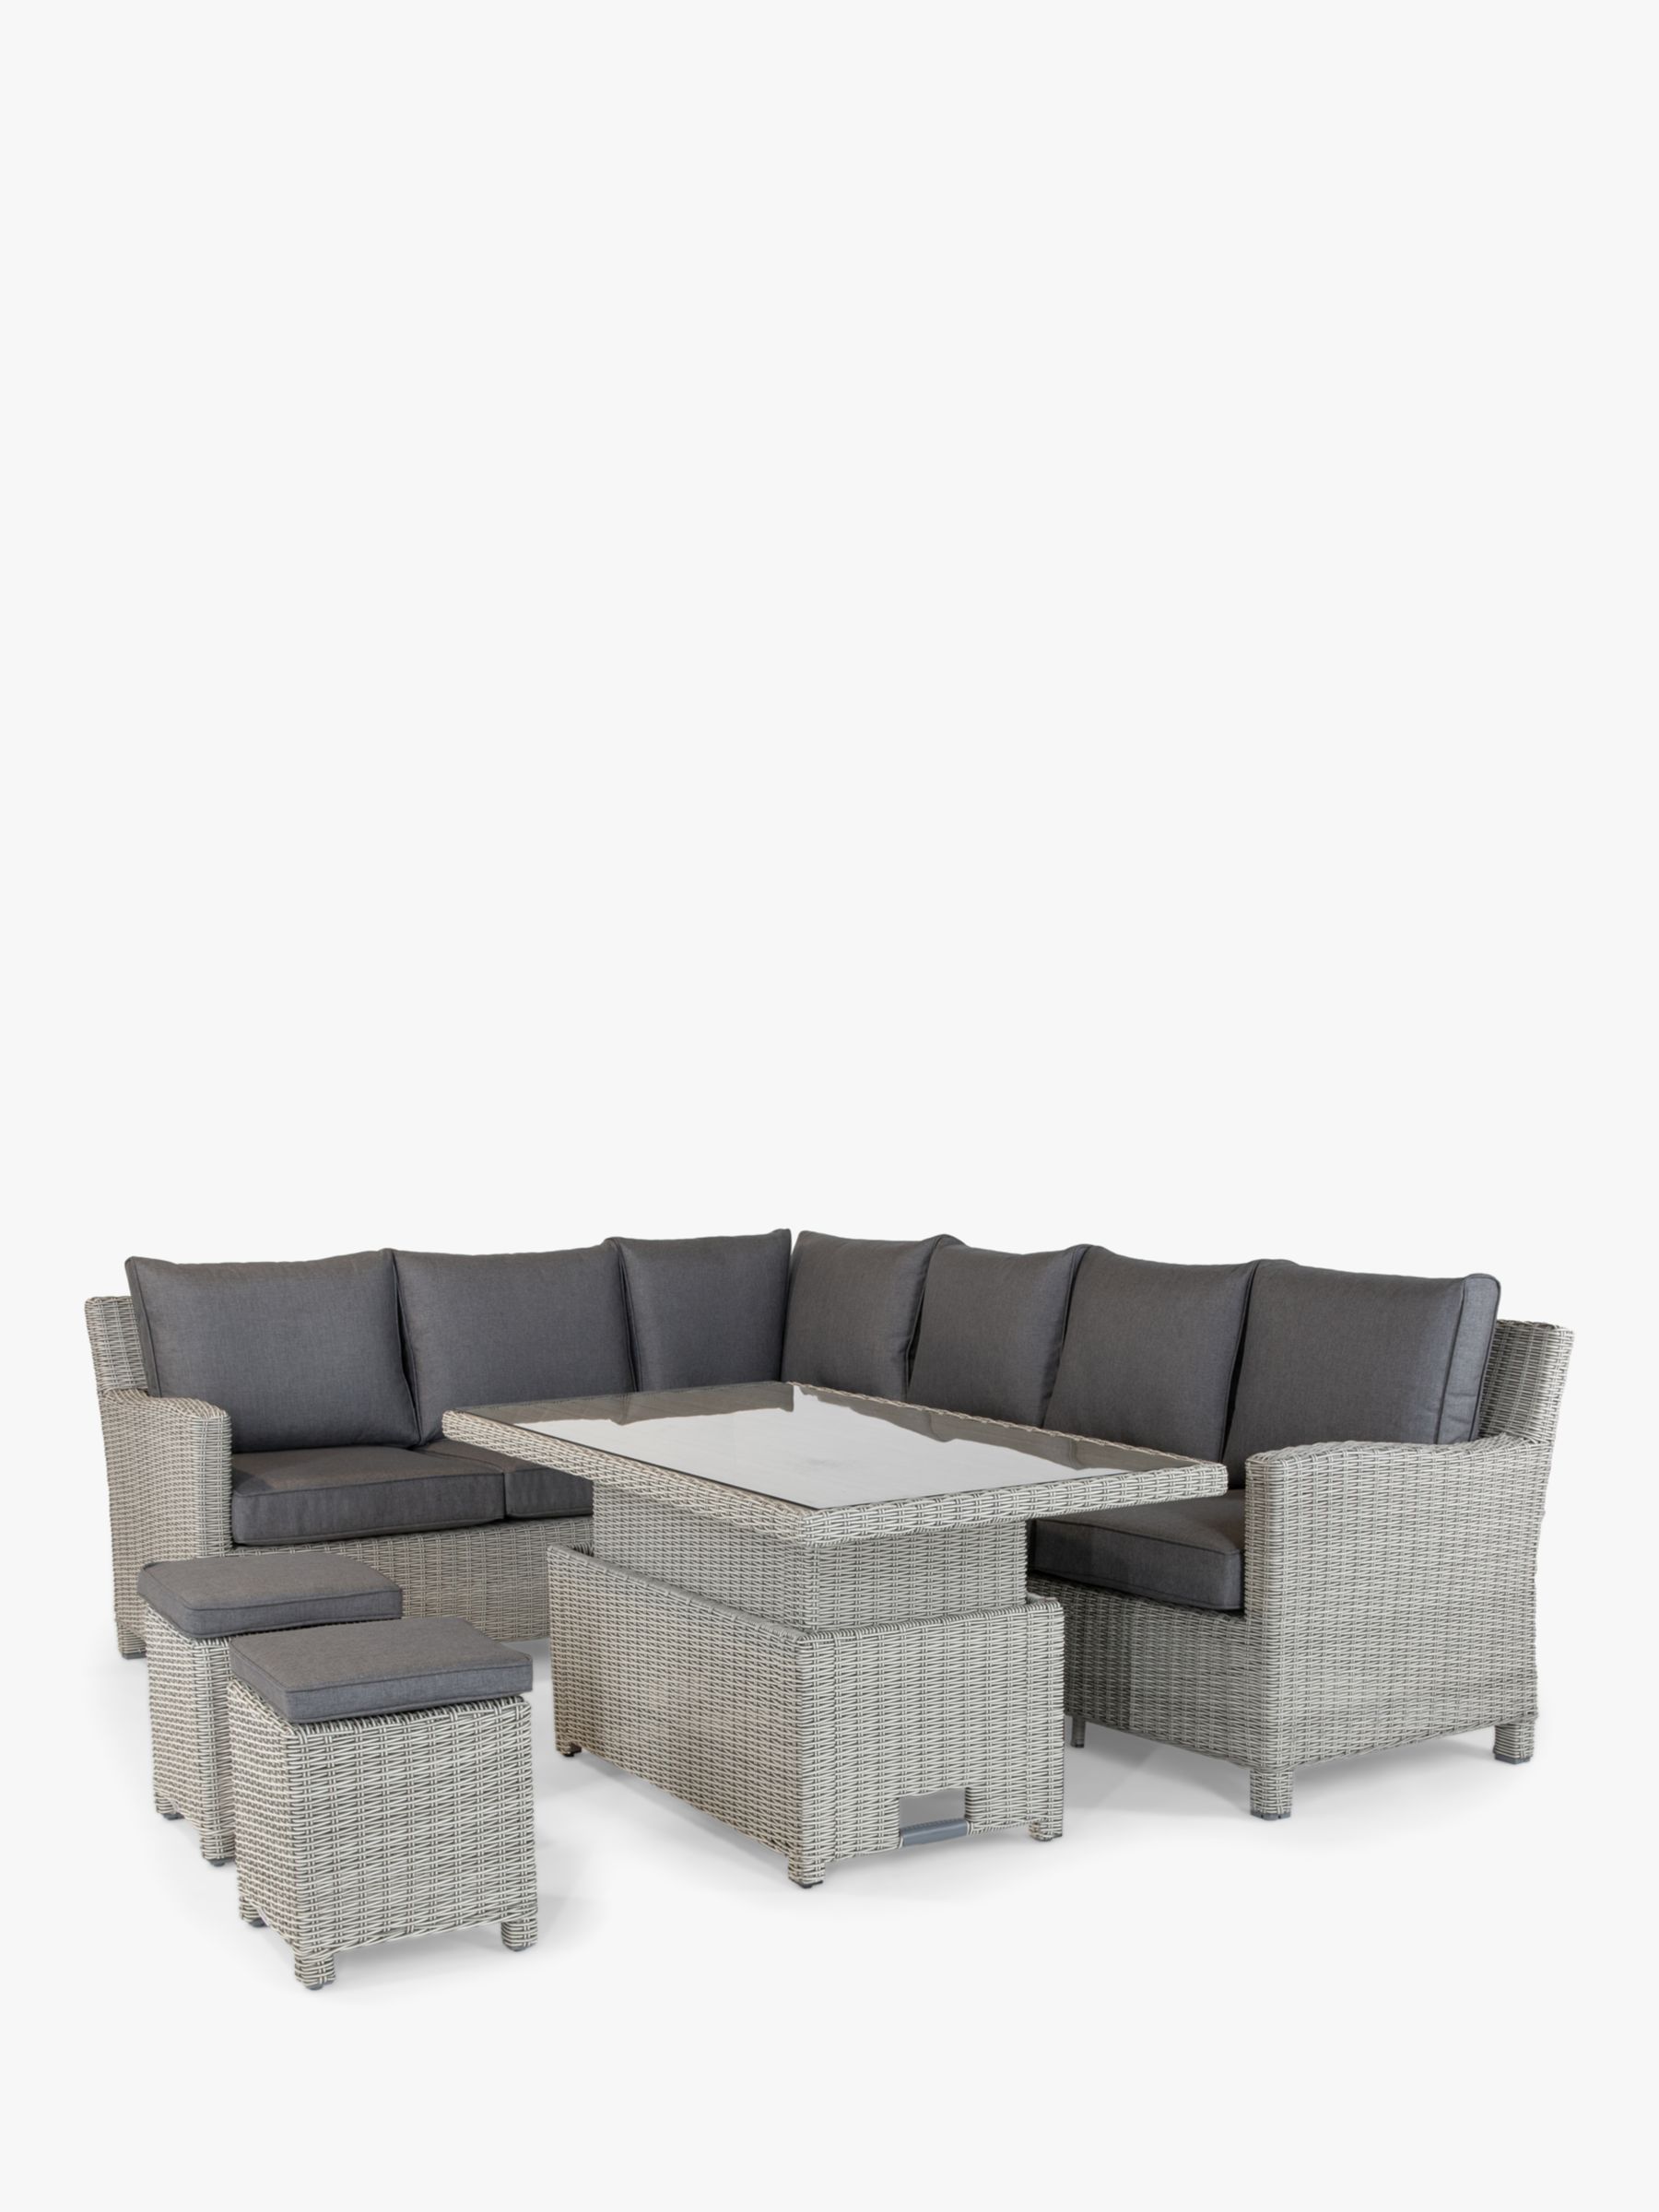 KETTLER Palma Signature 7-Seater Standard Corner Garden Lounging/Dining Set with Glass Top High/Low Table